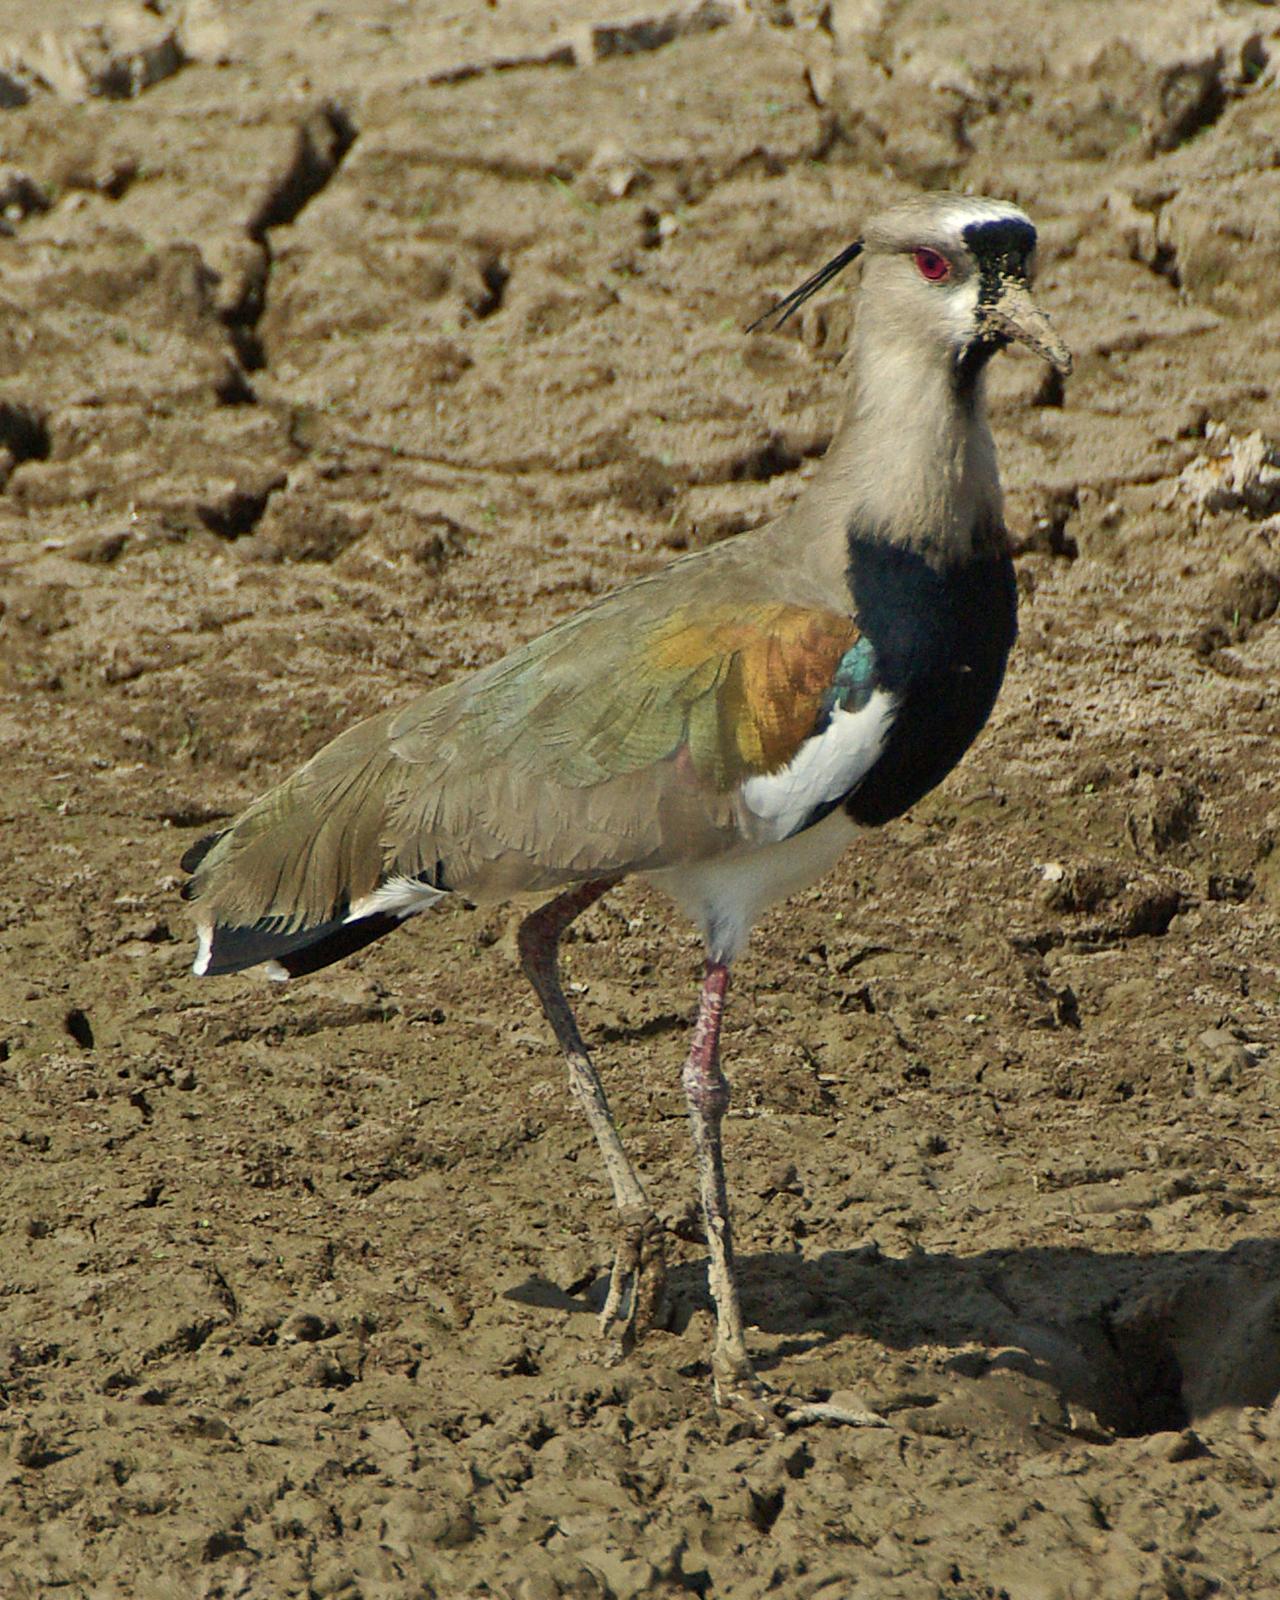 Southern Lapwing Photo by Robert Polkinghorn